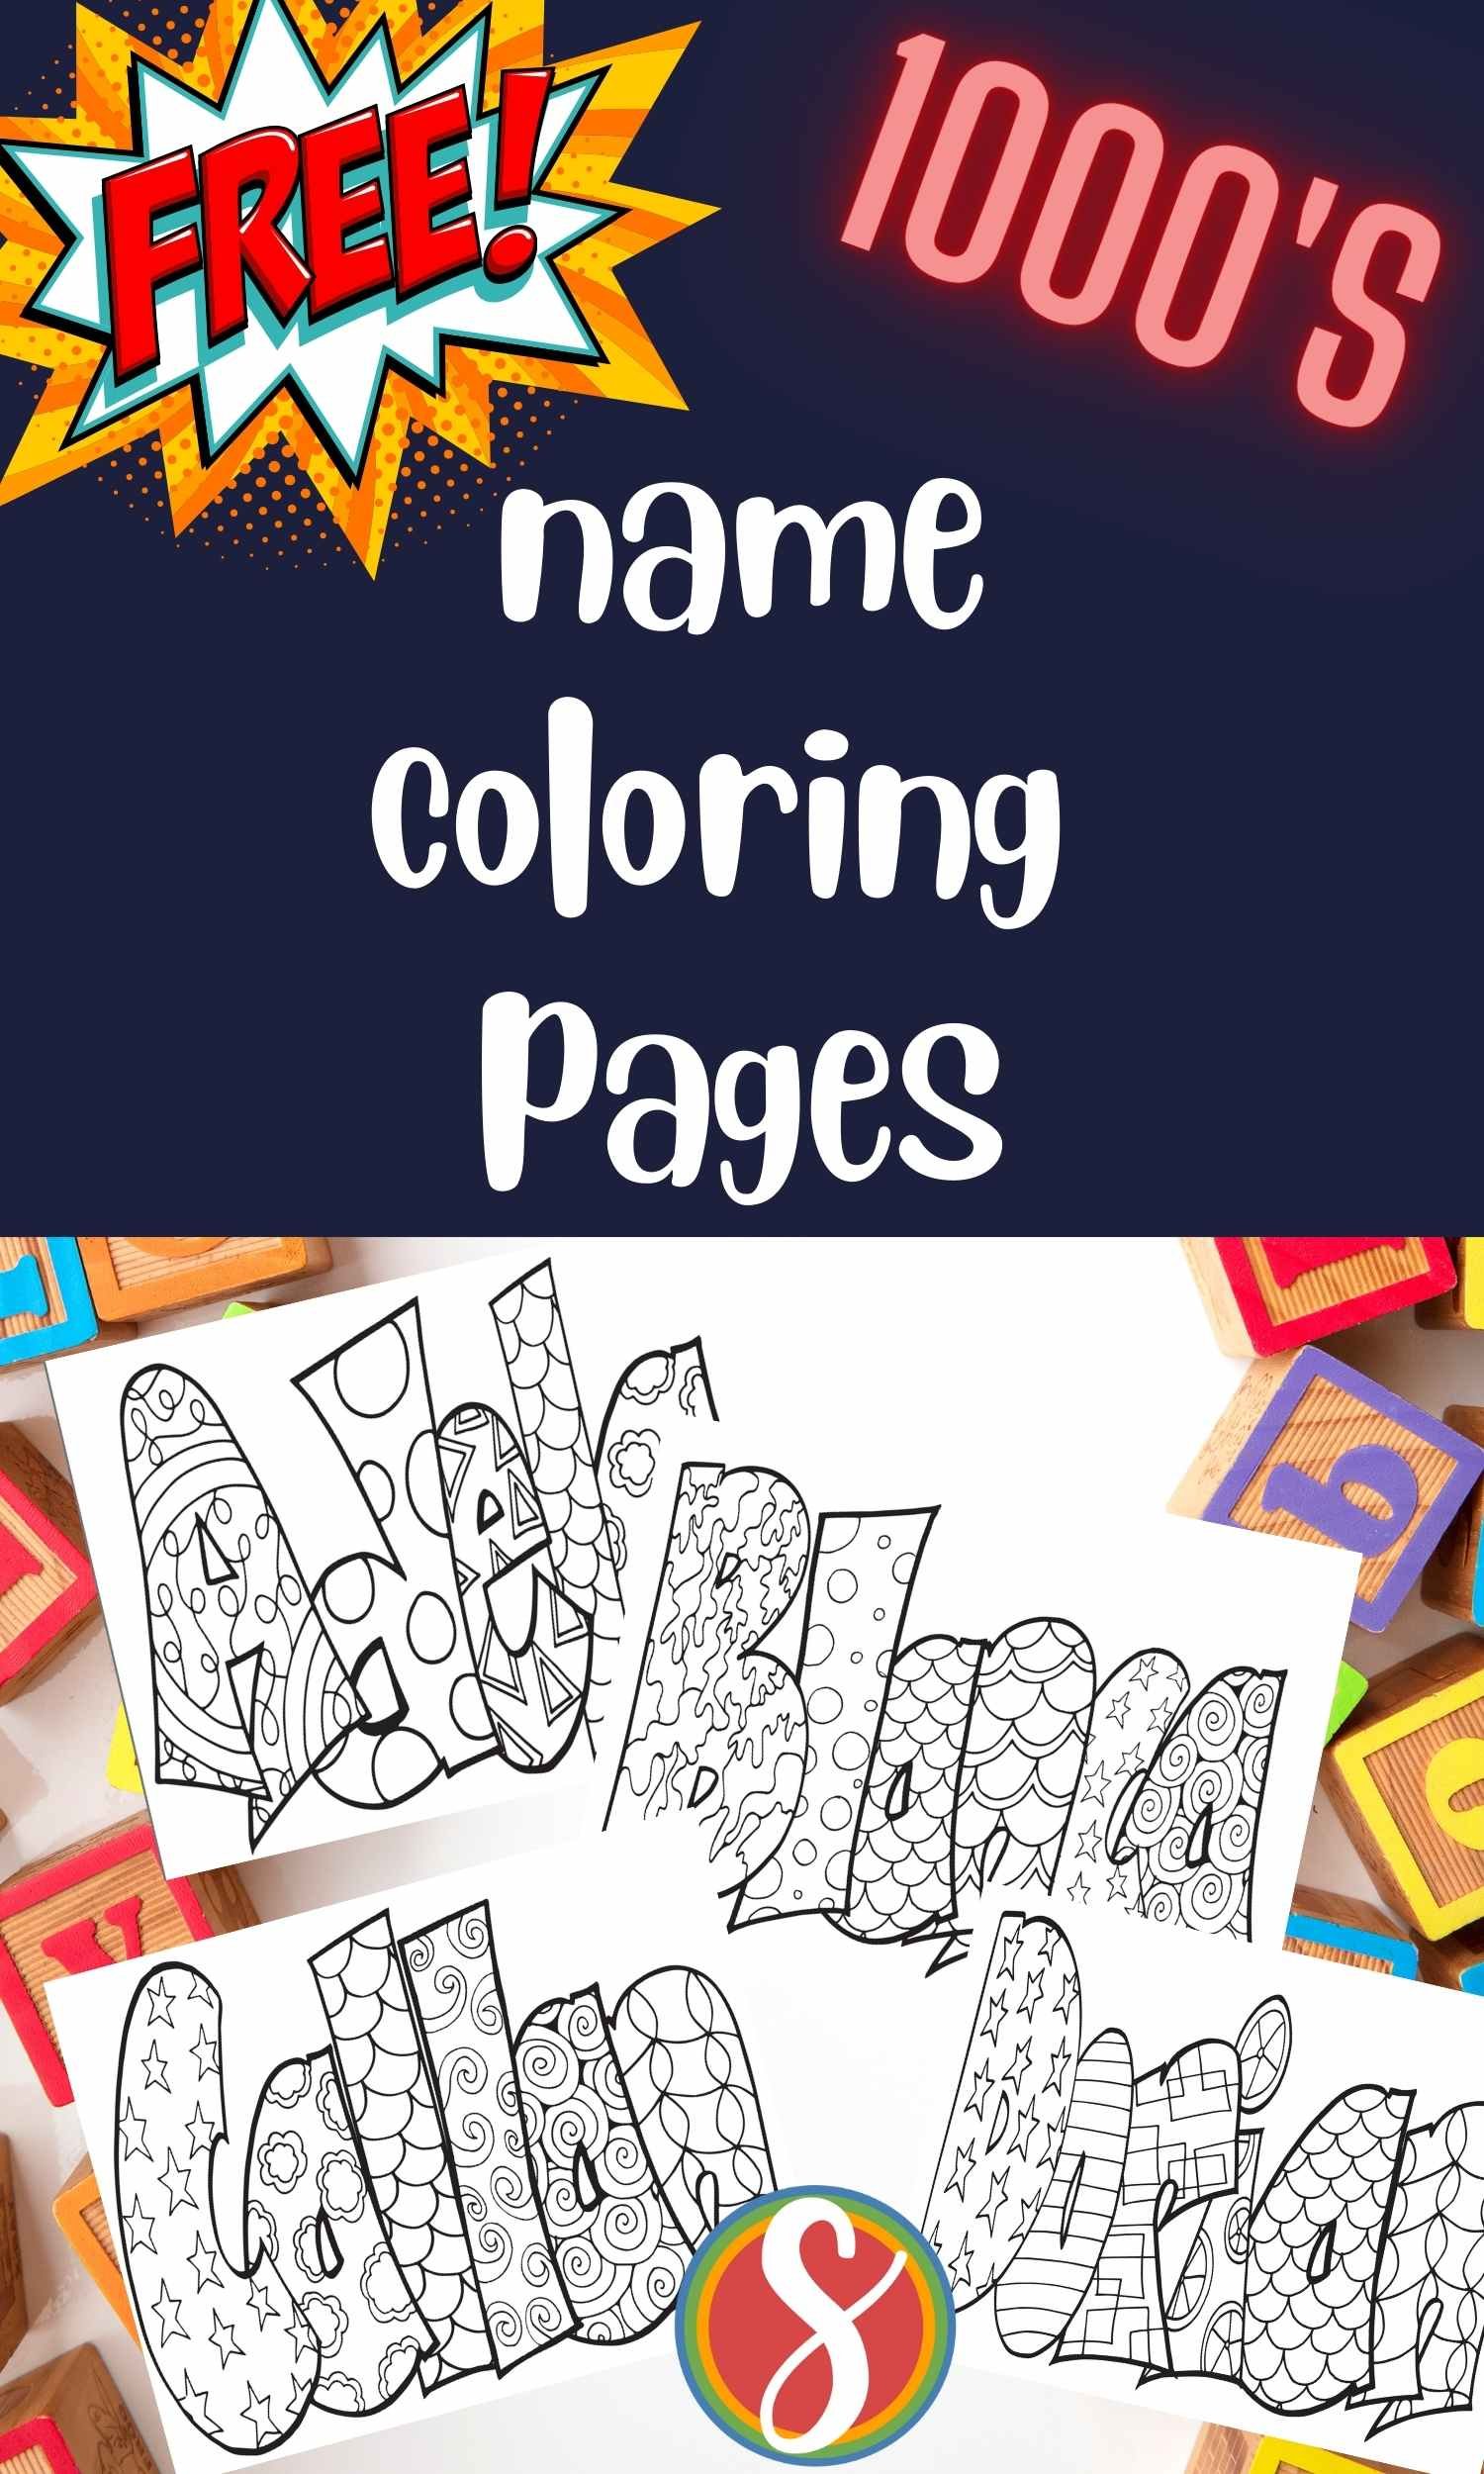 collage of name coloring pages